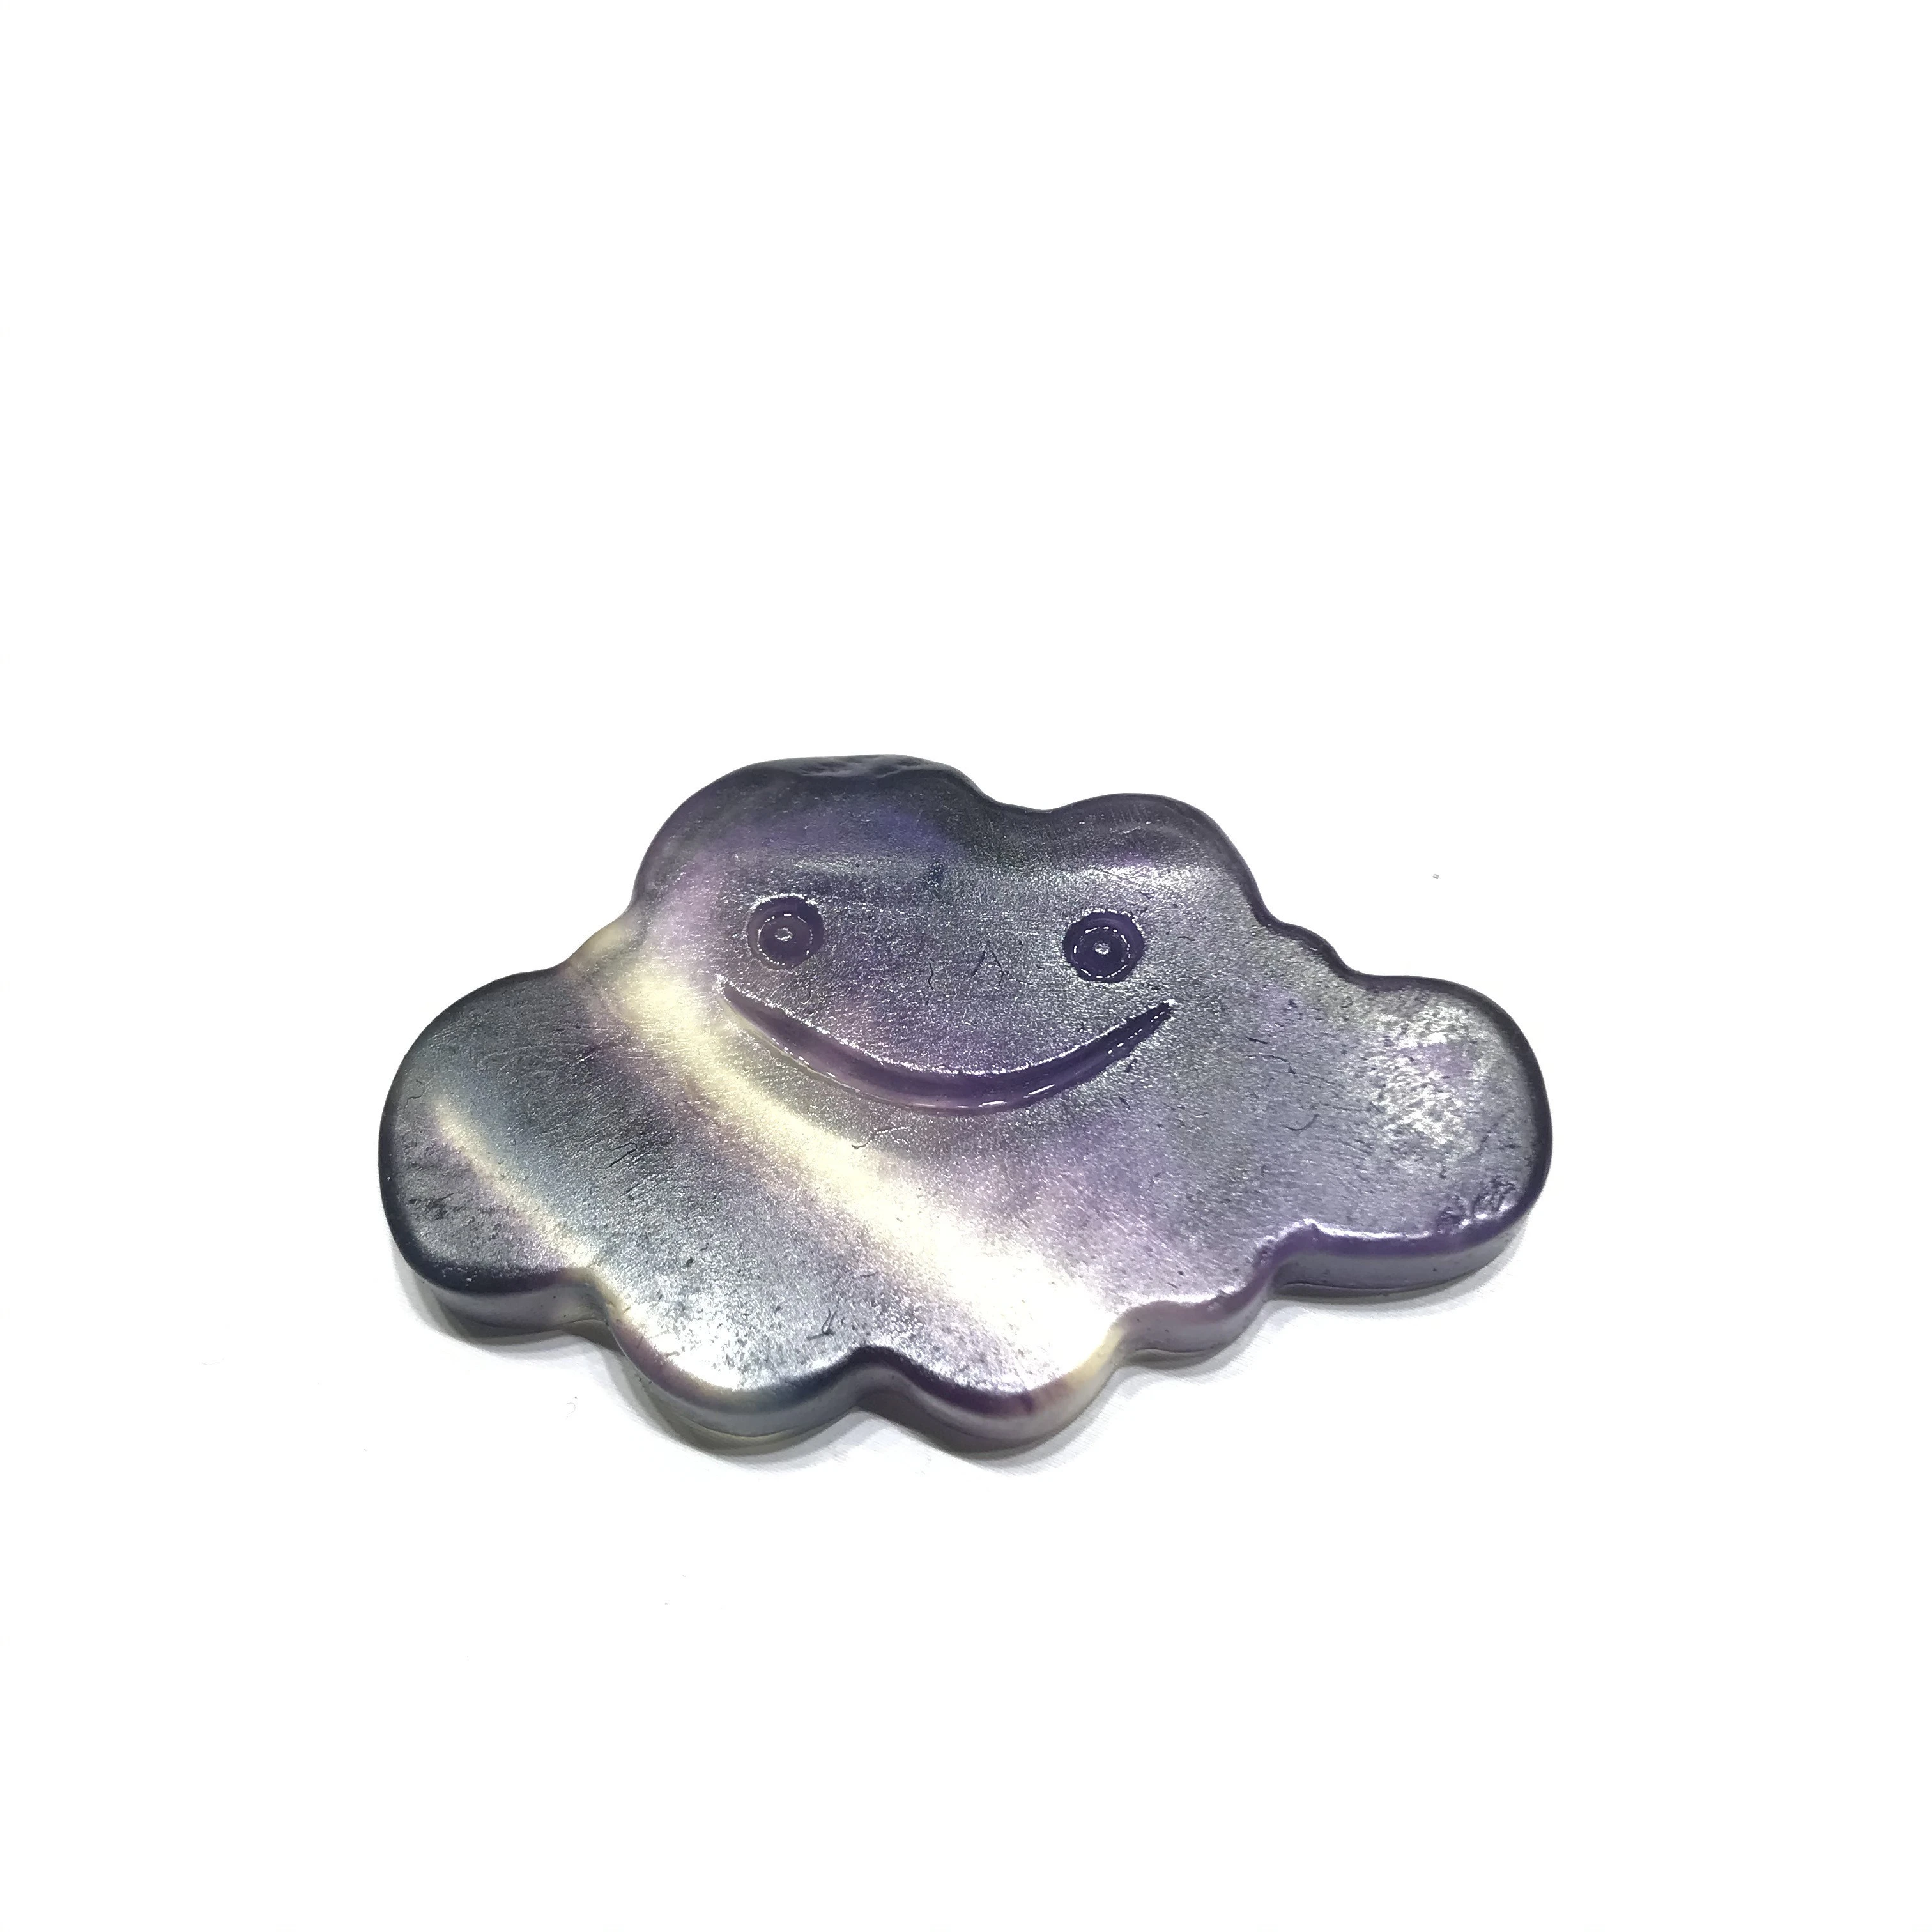 Natural Healing Stone Folk Crafts Fluorite Smile Cloud Crystal Pendant  For Gifts